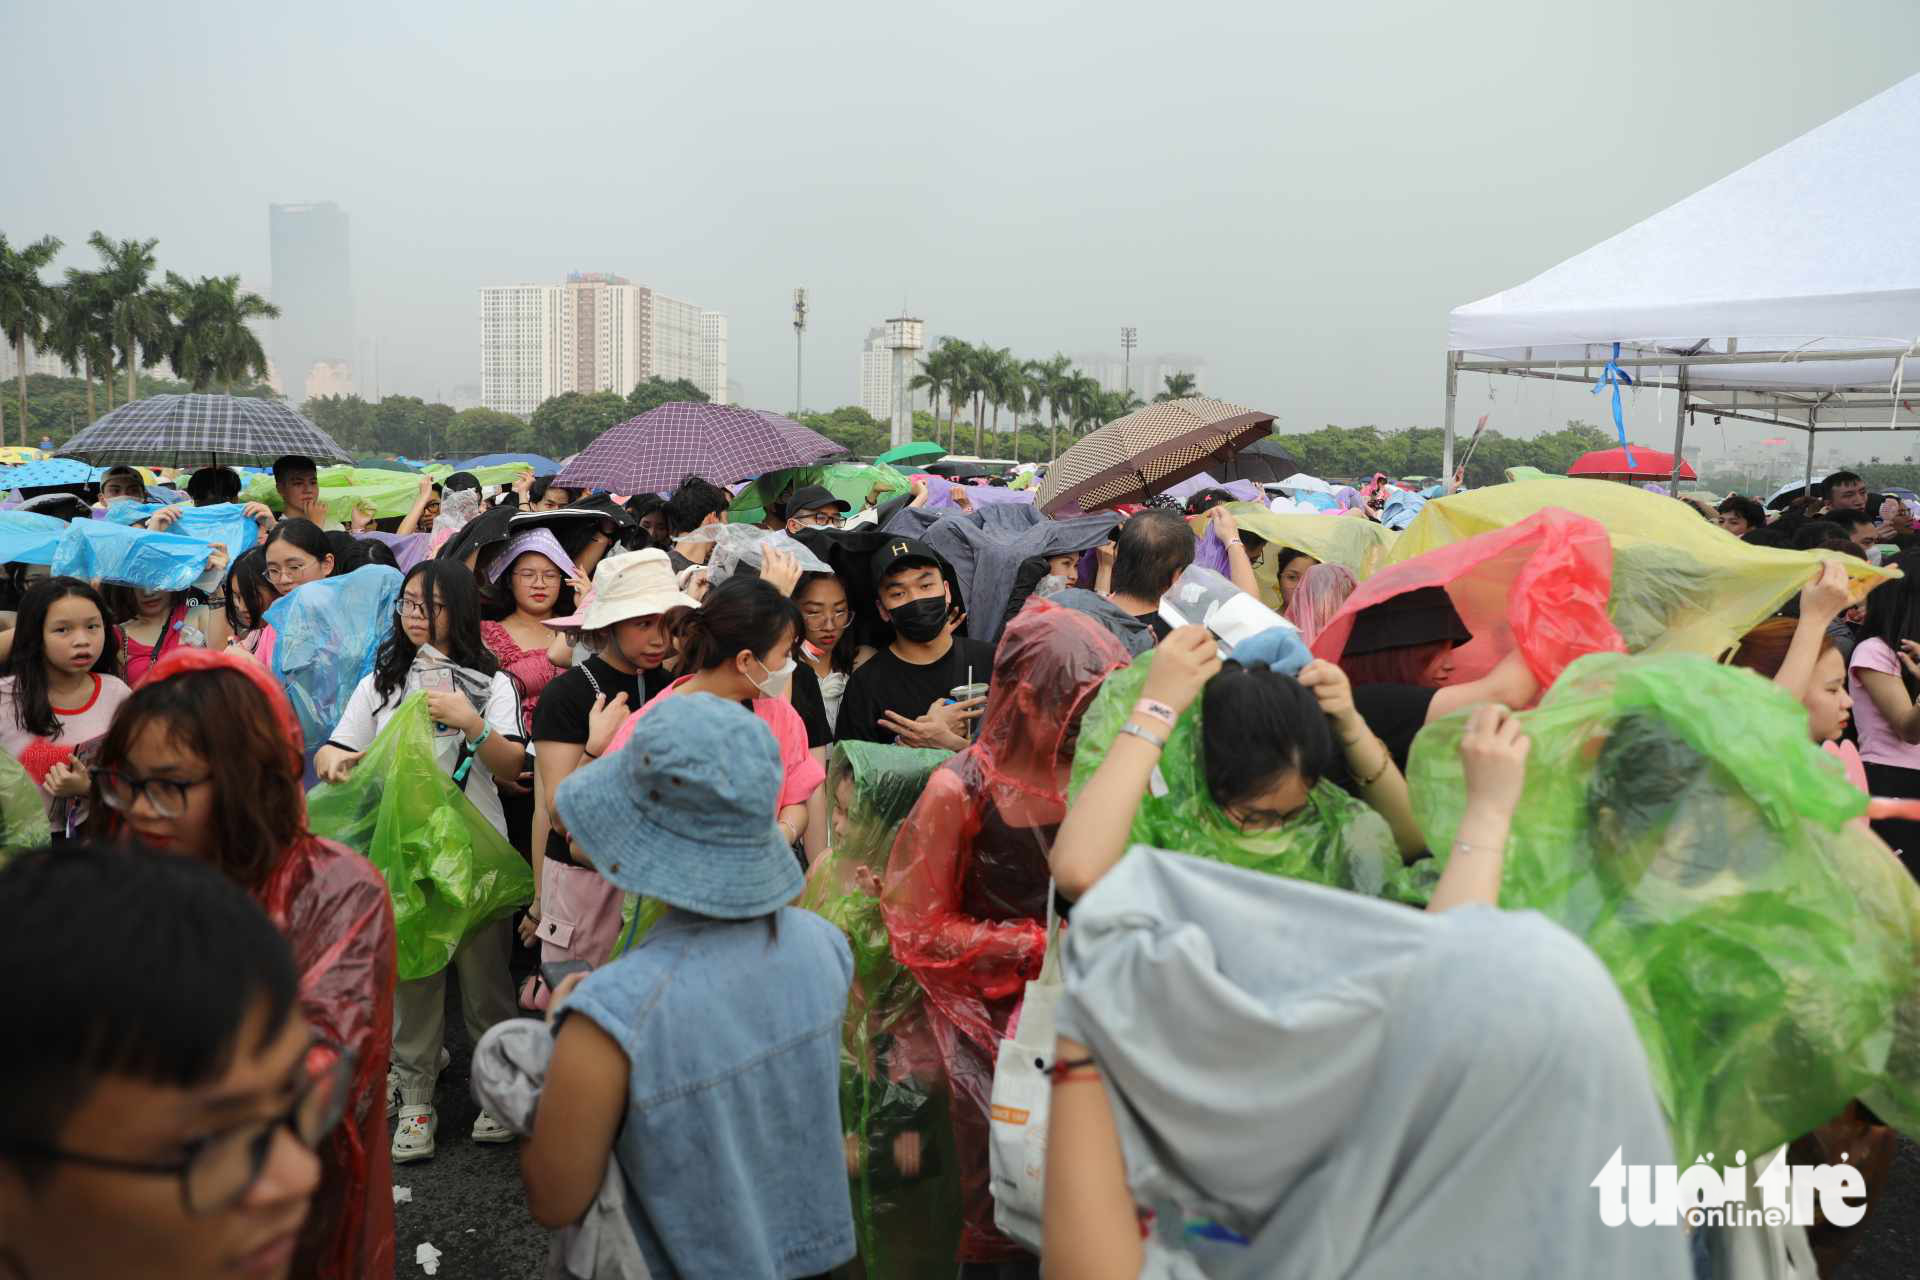 At 5:35 pm on July 29, 2023, it began raining. Many concert attendees decided to buy single-use raincoats at a high price of VND30,000 (US$1.26) each. Photo: Danh Khang / Tuoi Tre